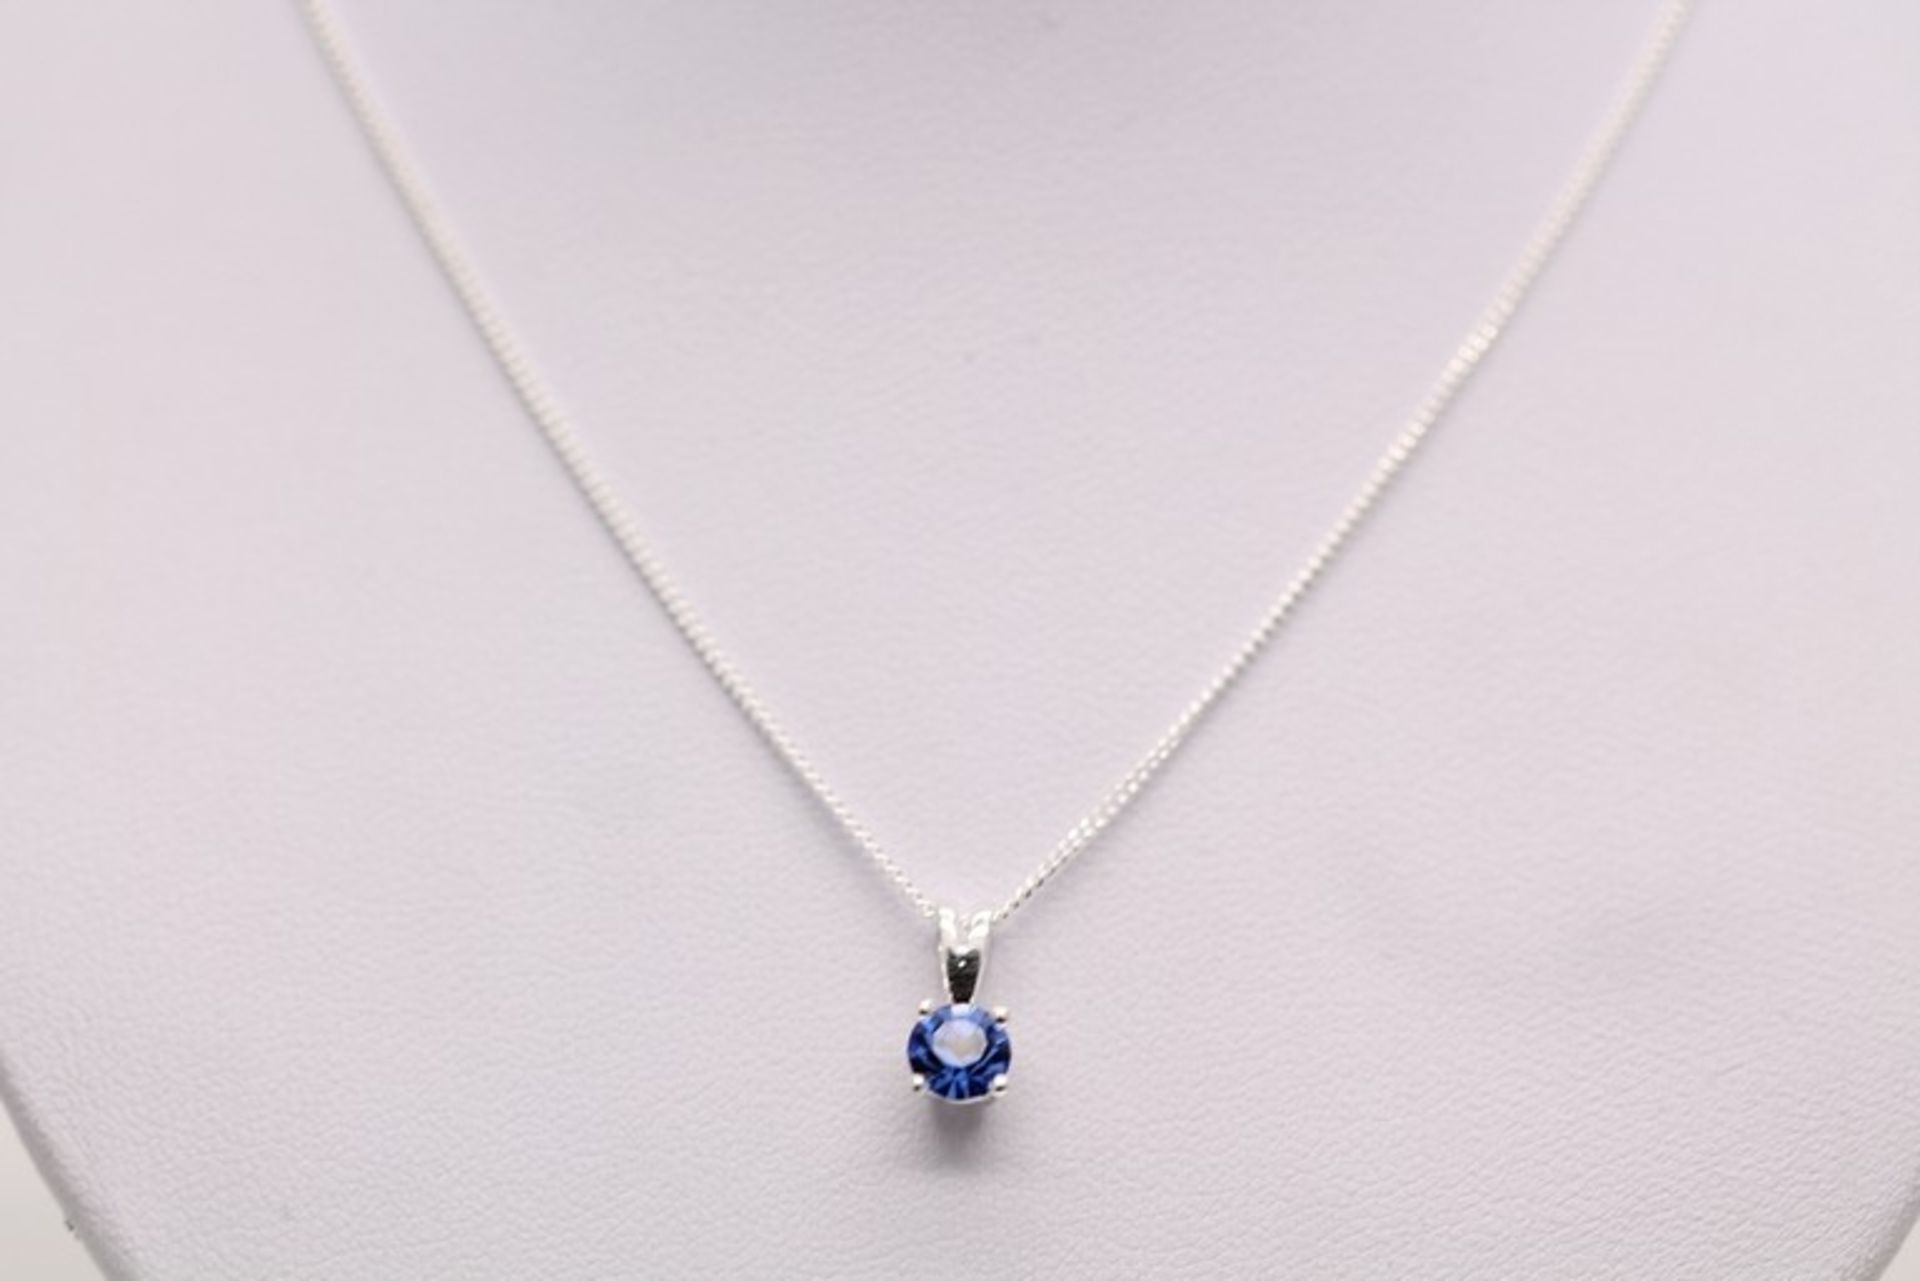 1 x BOXED BRAND NEW SOLID SILVER LADIES NECKLACE SET WITH A BLUE AAA+ SIMULATED DIAMONDS (PV-JH)(65)